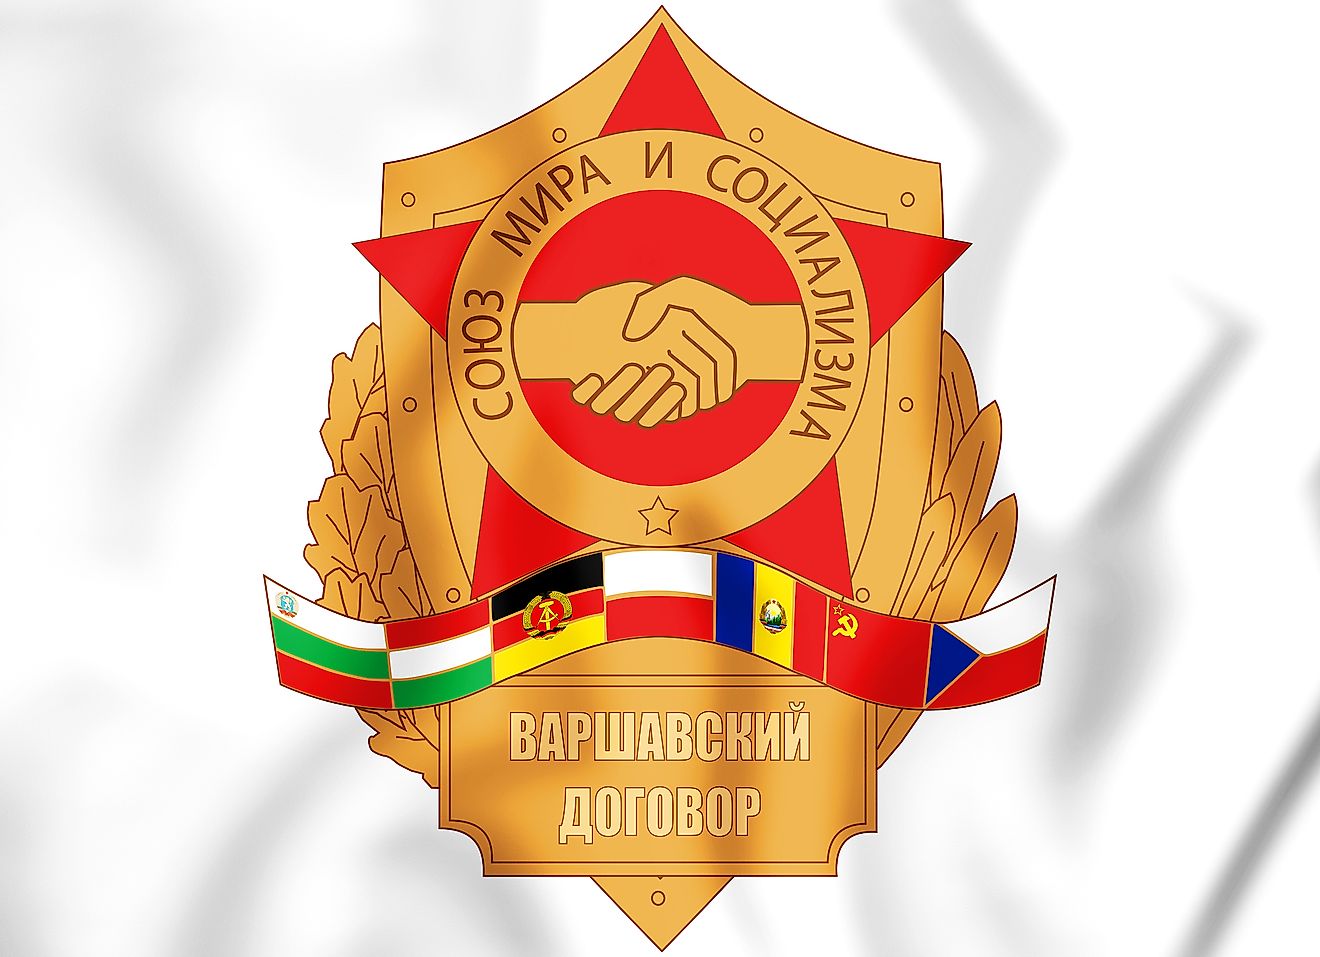 Emblem of the Warsaw Pact